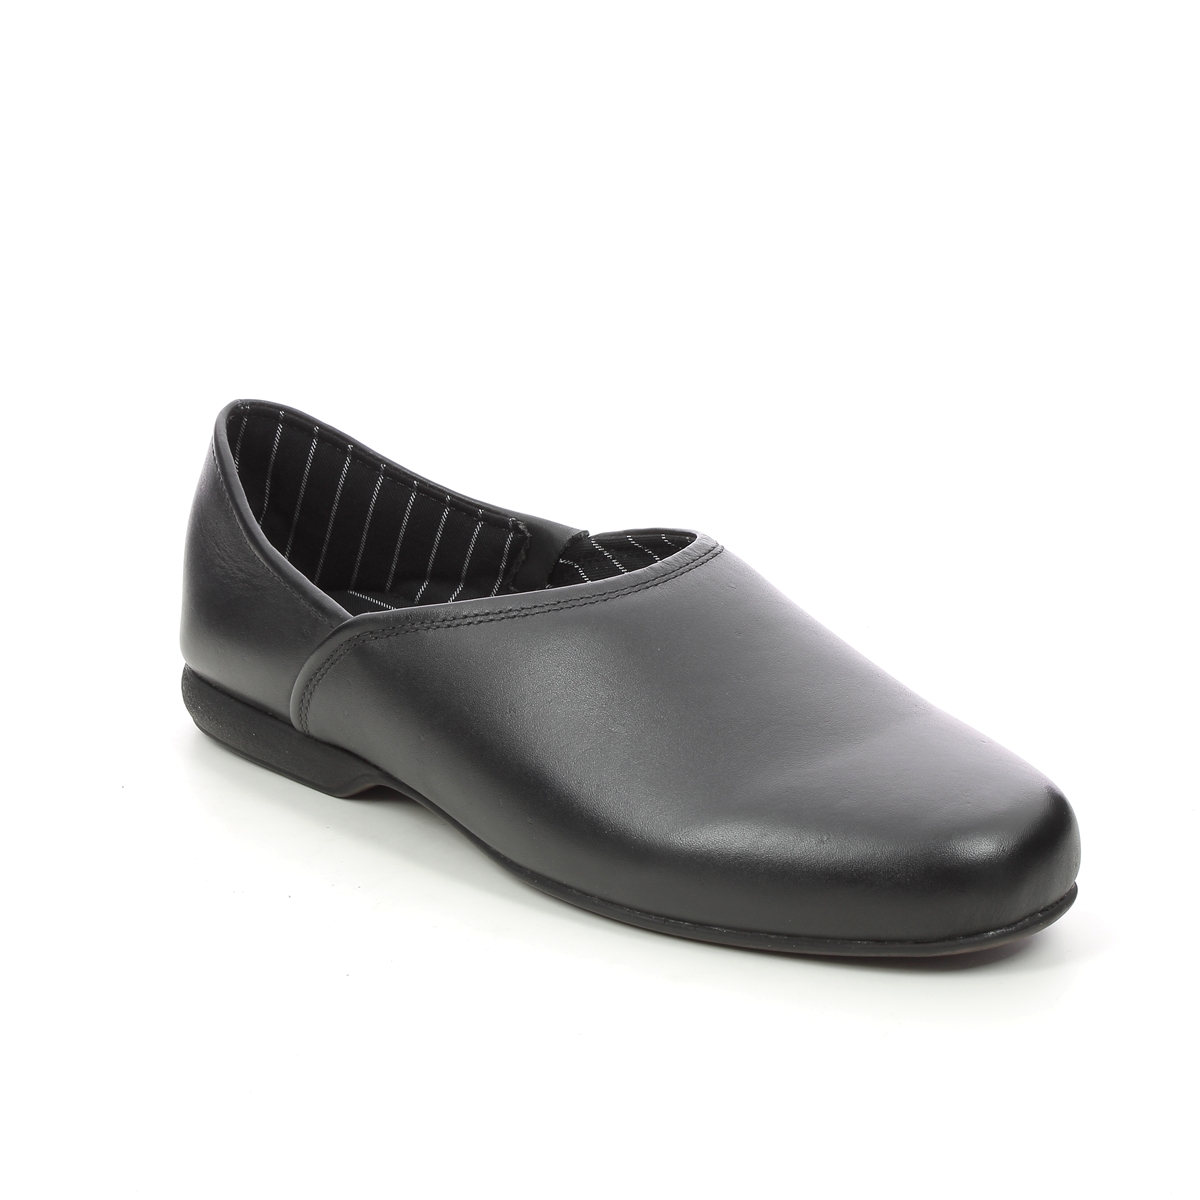 Clarks Harston Elite Black leather Mens slippers 4472-07G in a Plain Leather in Size 7